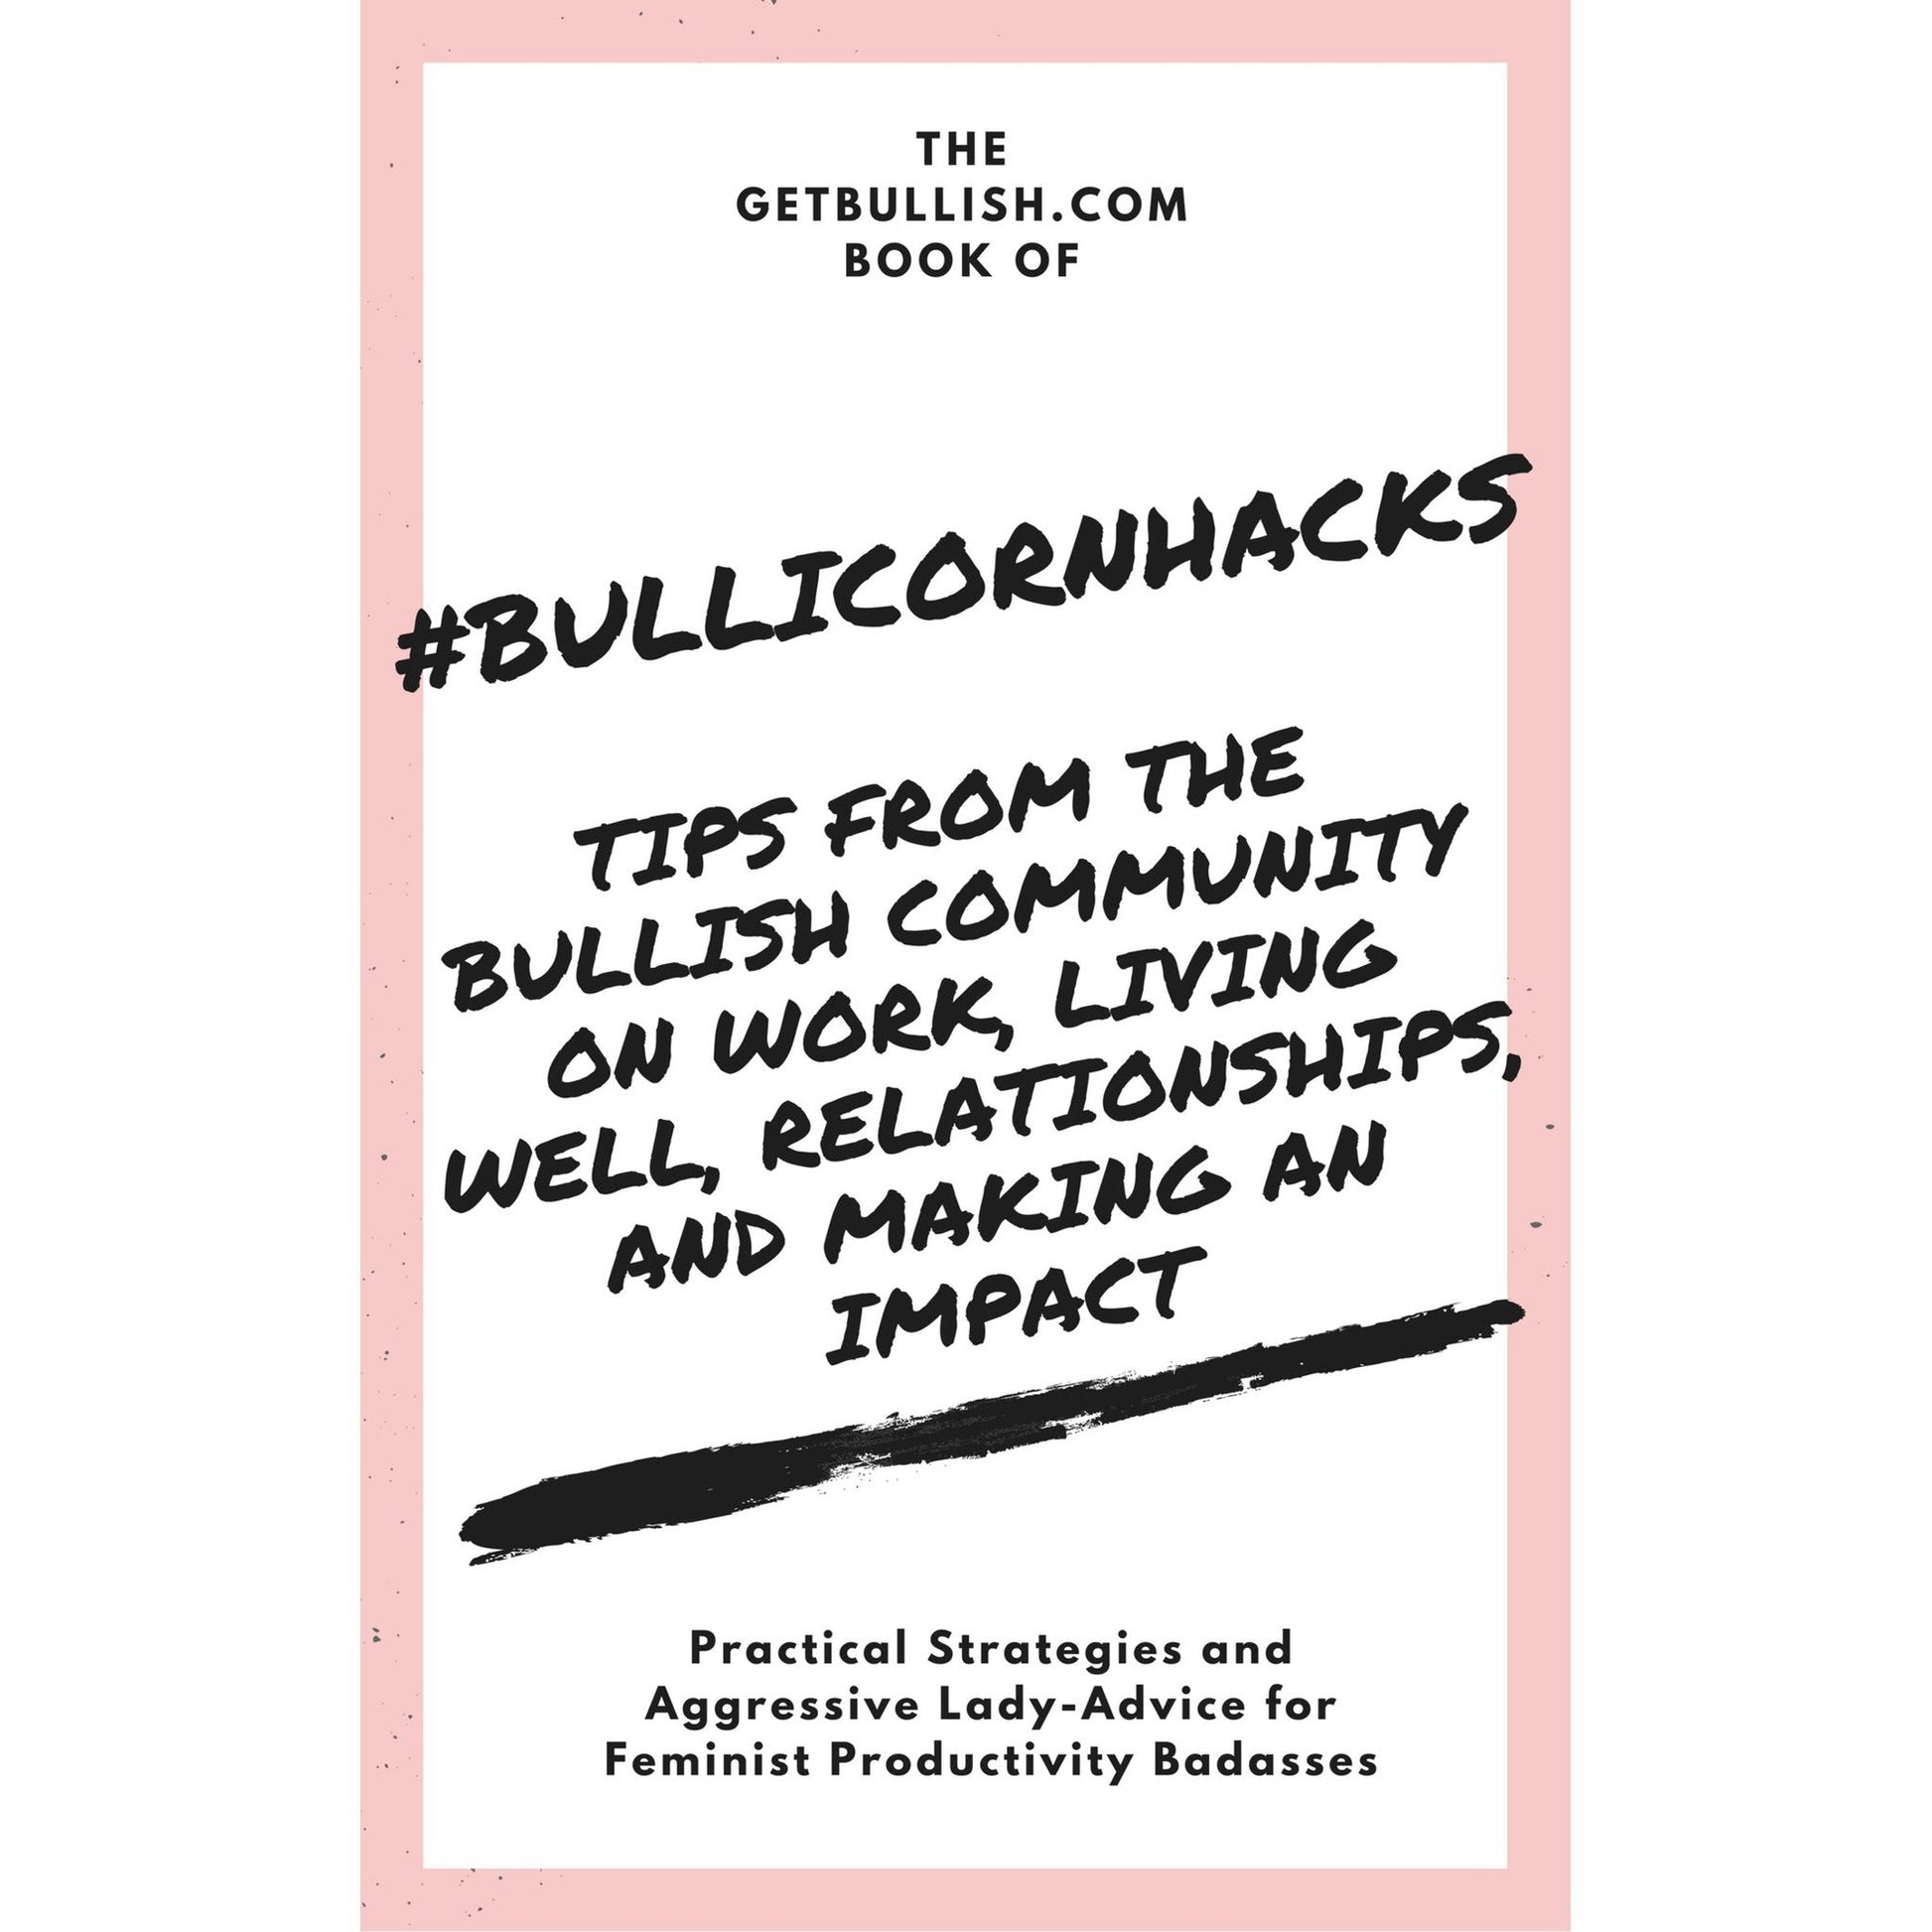 #Bullicornhacks Ebook: Tips From the Bullish Community on Work, Living Well, Relationships, and Making an Impact, with an Introduction by Jennifer Dziura (PDF Download)